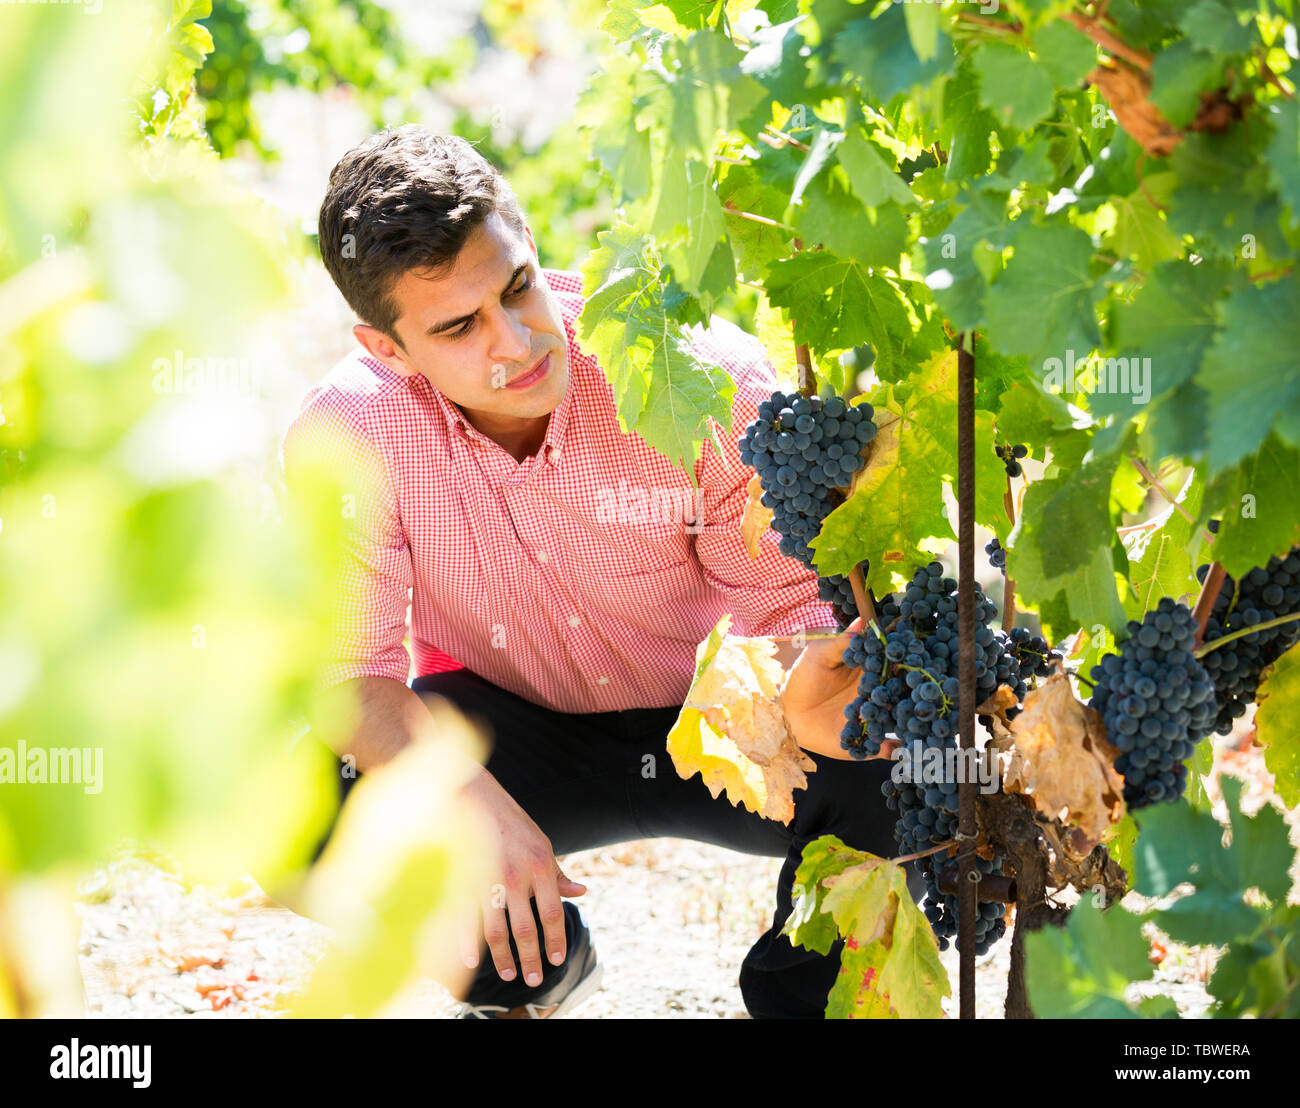 male vineyard worker cutting clusters of wine grape Stock Photo